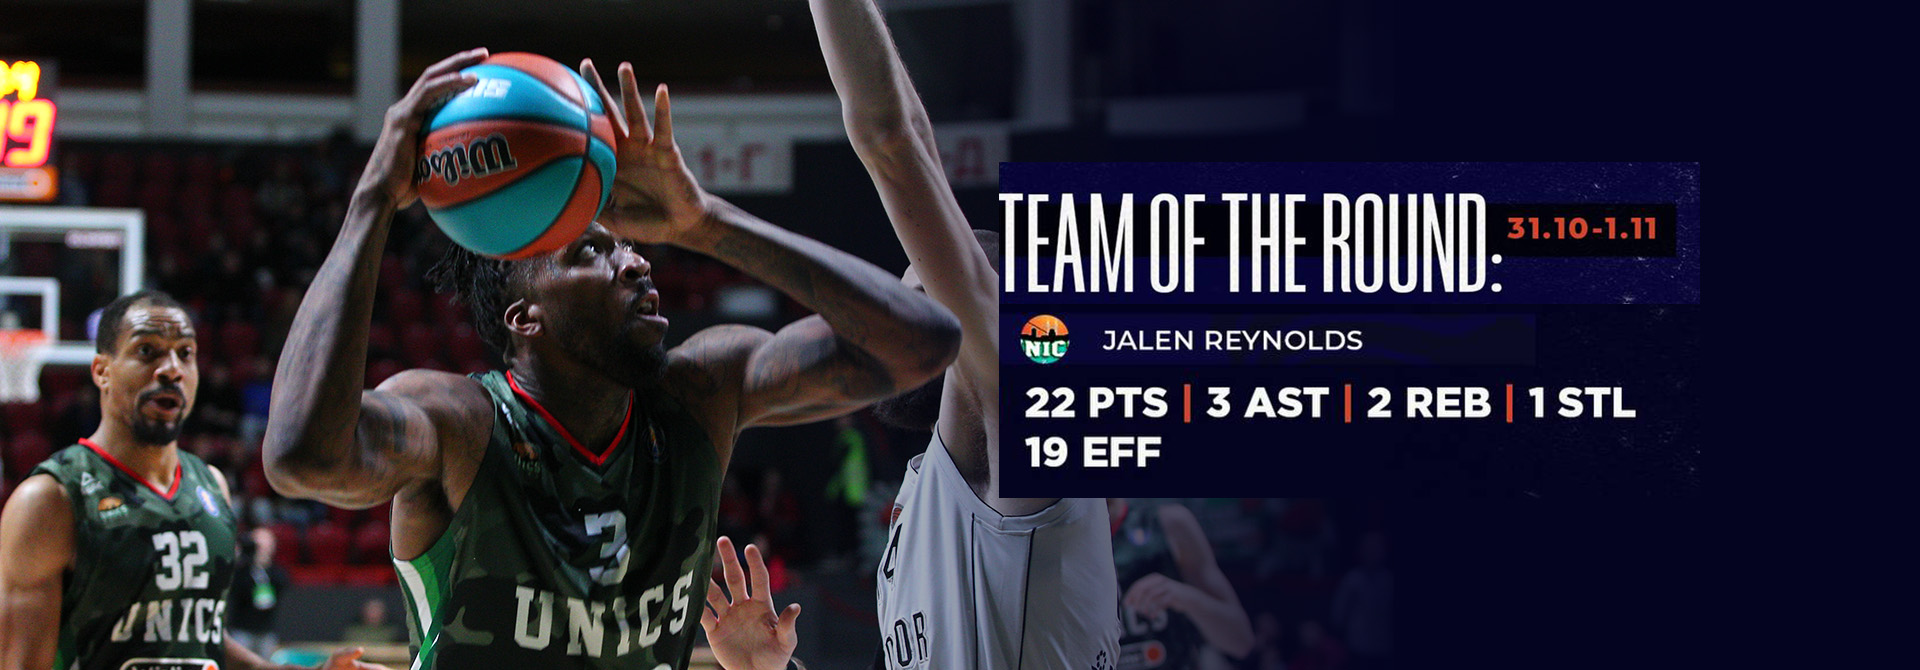 Jalen Reynolds was included in the All-VTB United League Team of the week!